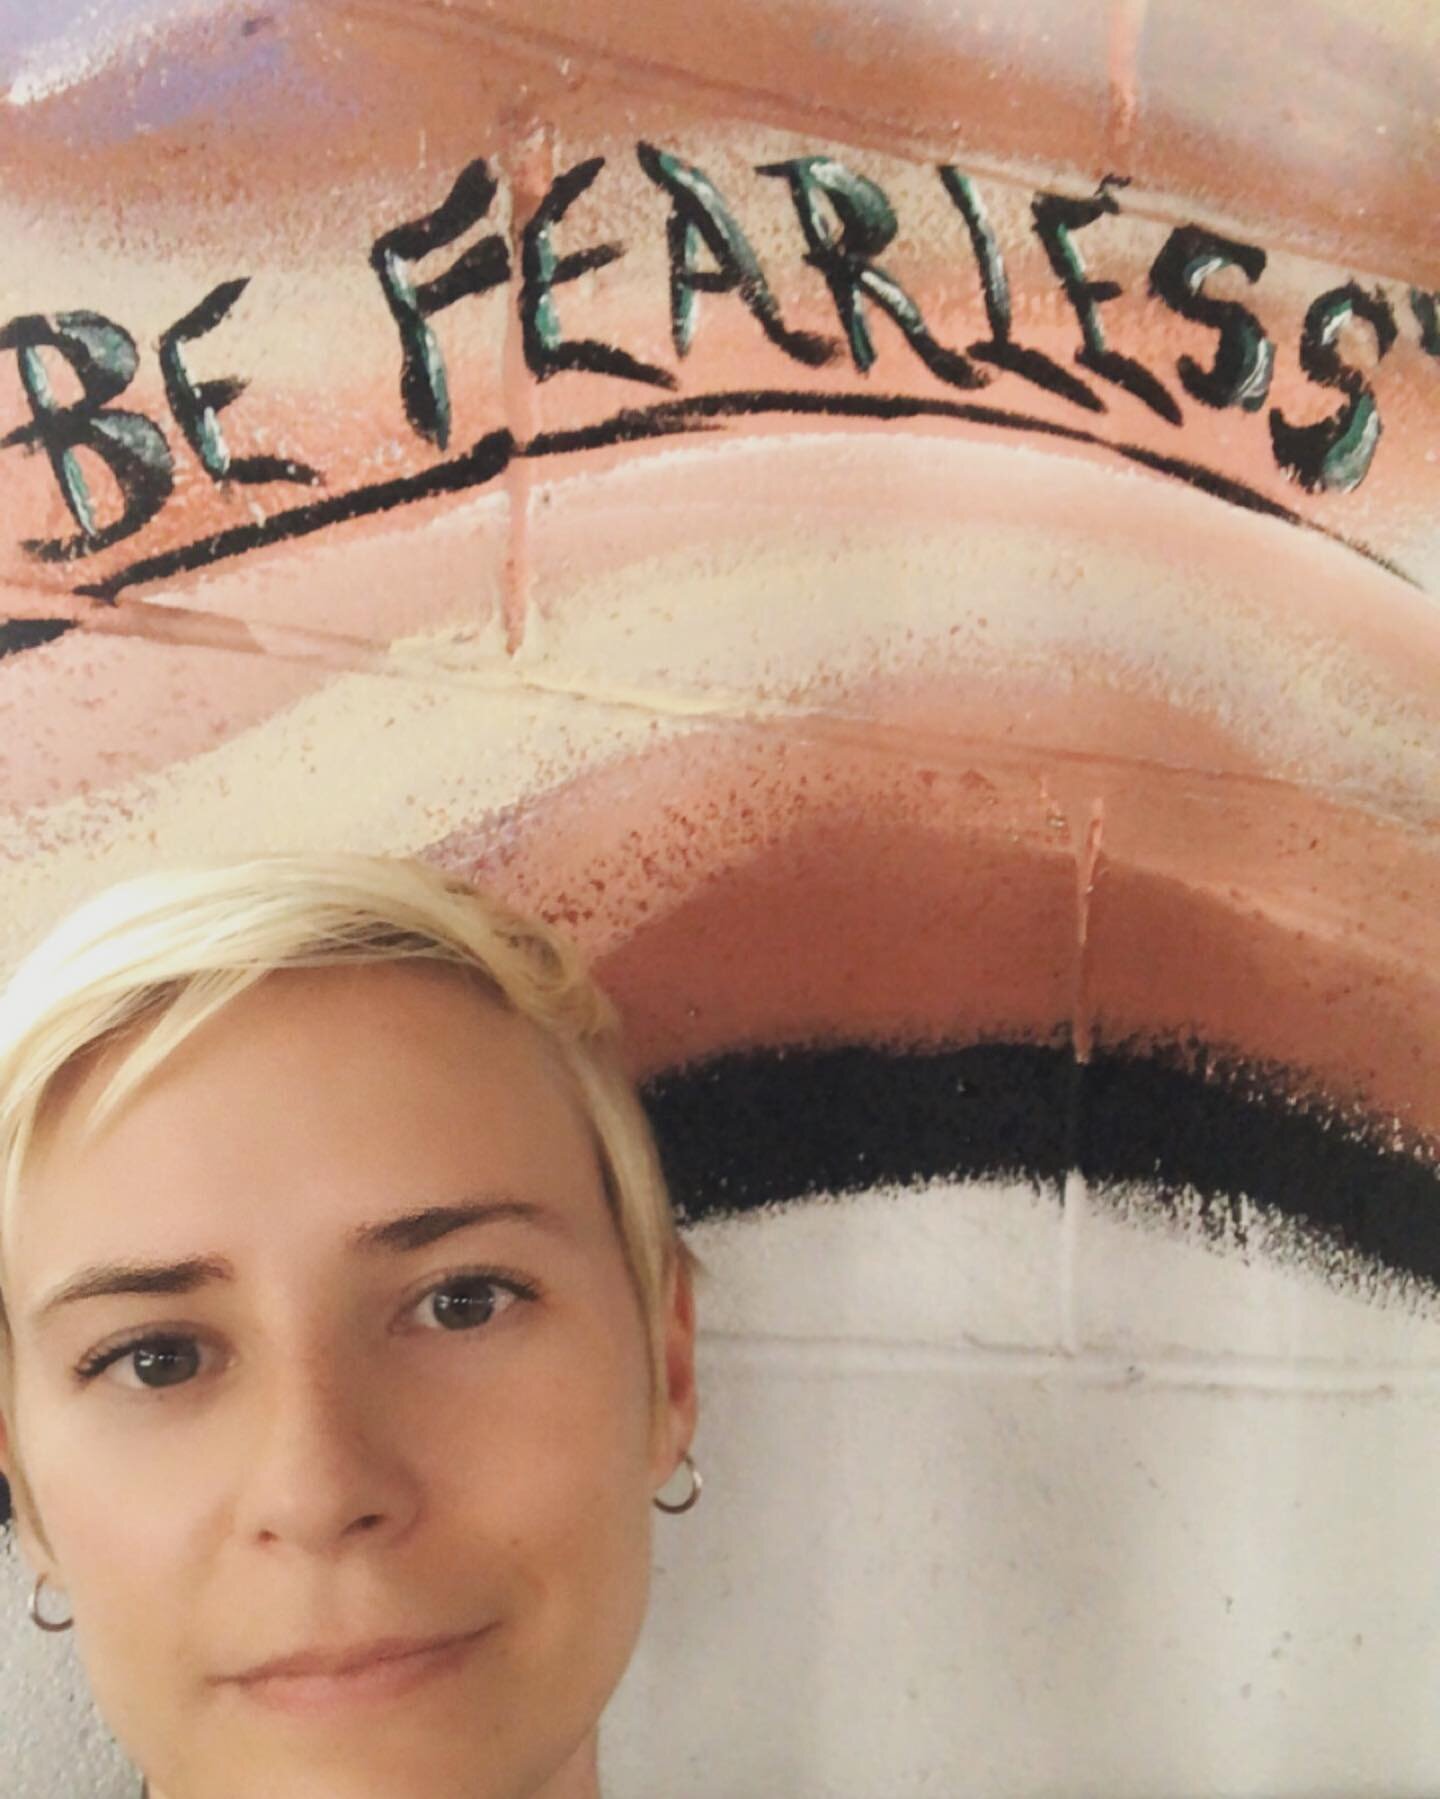 The future feels a little scary so I&rsquo;ve done some retreating inward, taking some time away from the social media world, and reconnecting with what makes me feel safe. I don&rsquo;t think it&rsquo;s possible to always be fearless. Likes everythi